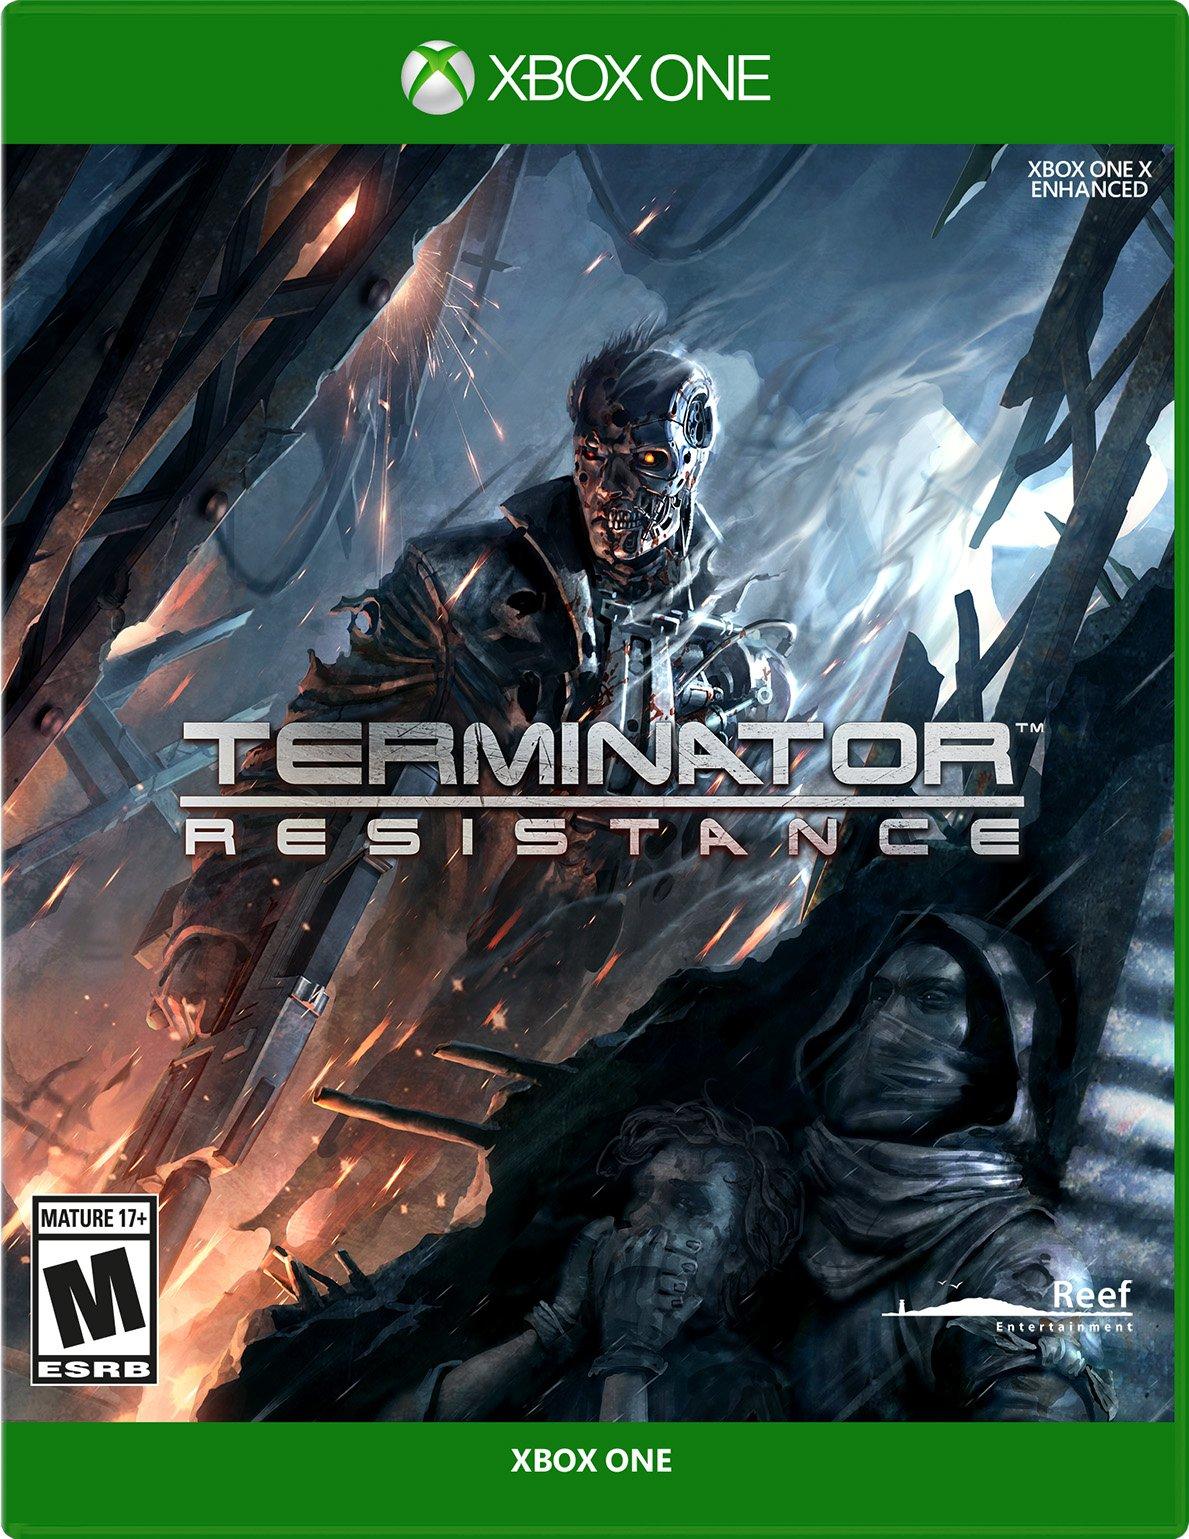 Terminator: Resistance - Complete Edition' Announced for Xbox